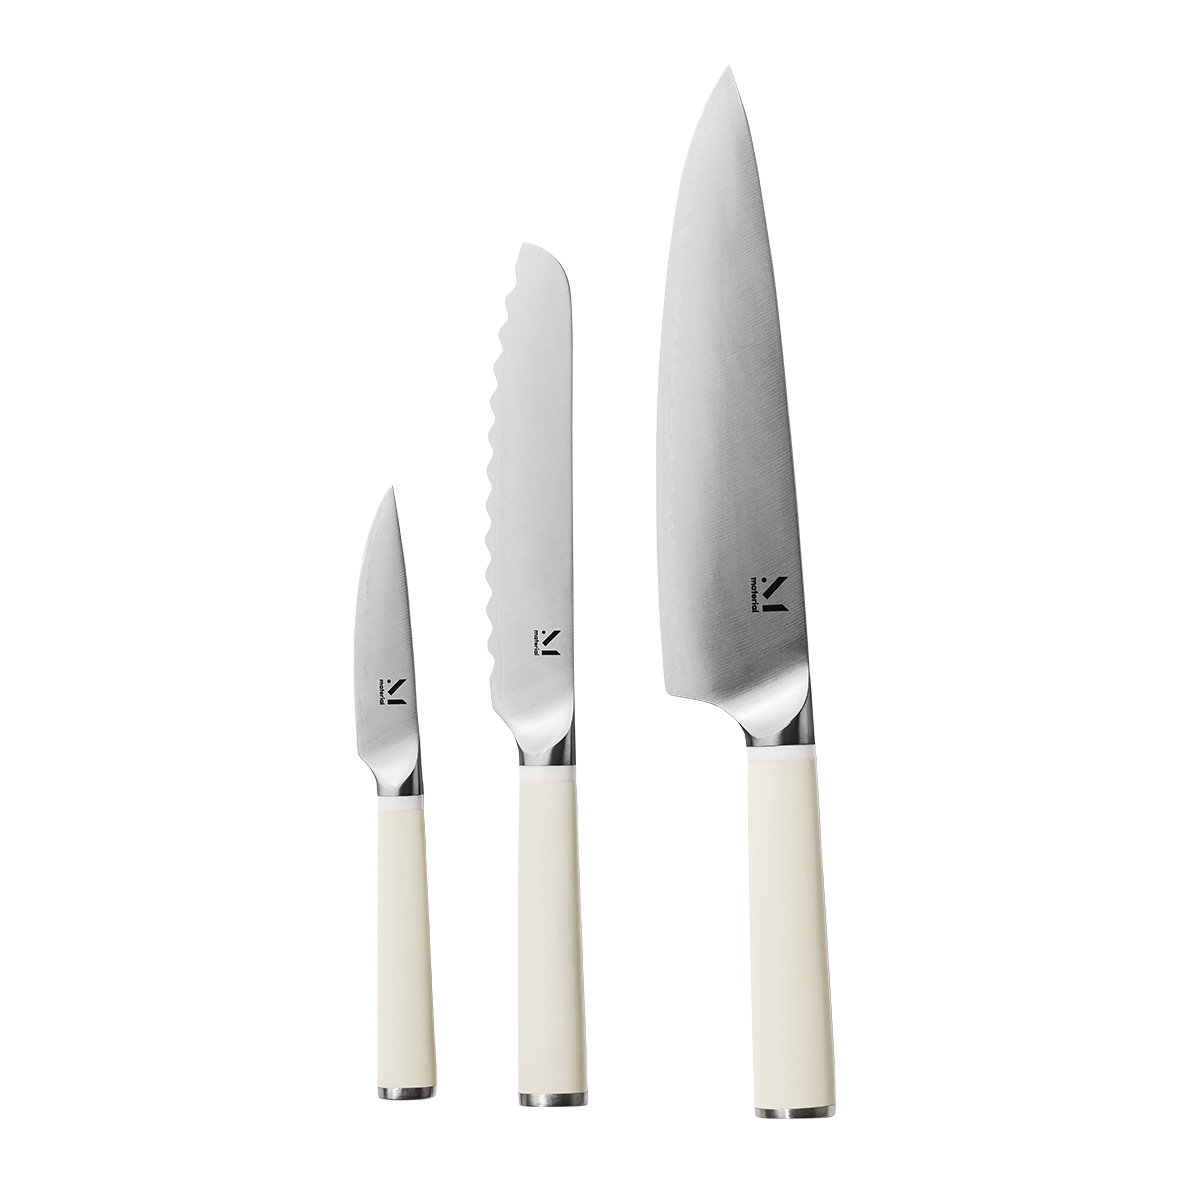 https://www.containerstore.com/catalogimages/486783/10094892---Trio-of-Knives-in-Cool-Ne.jpg